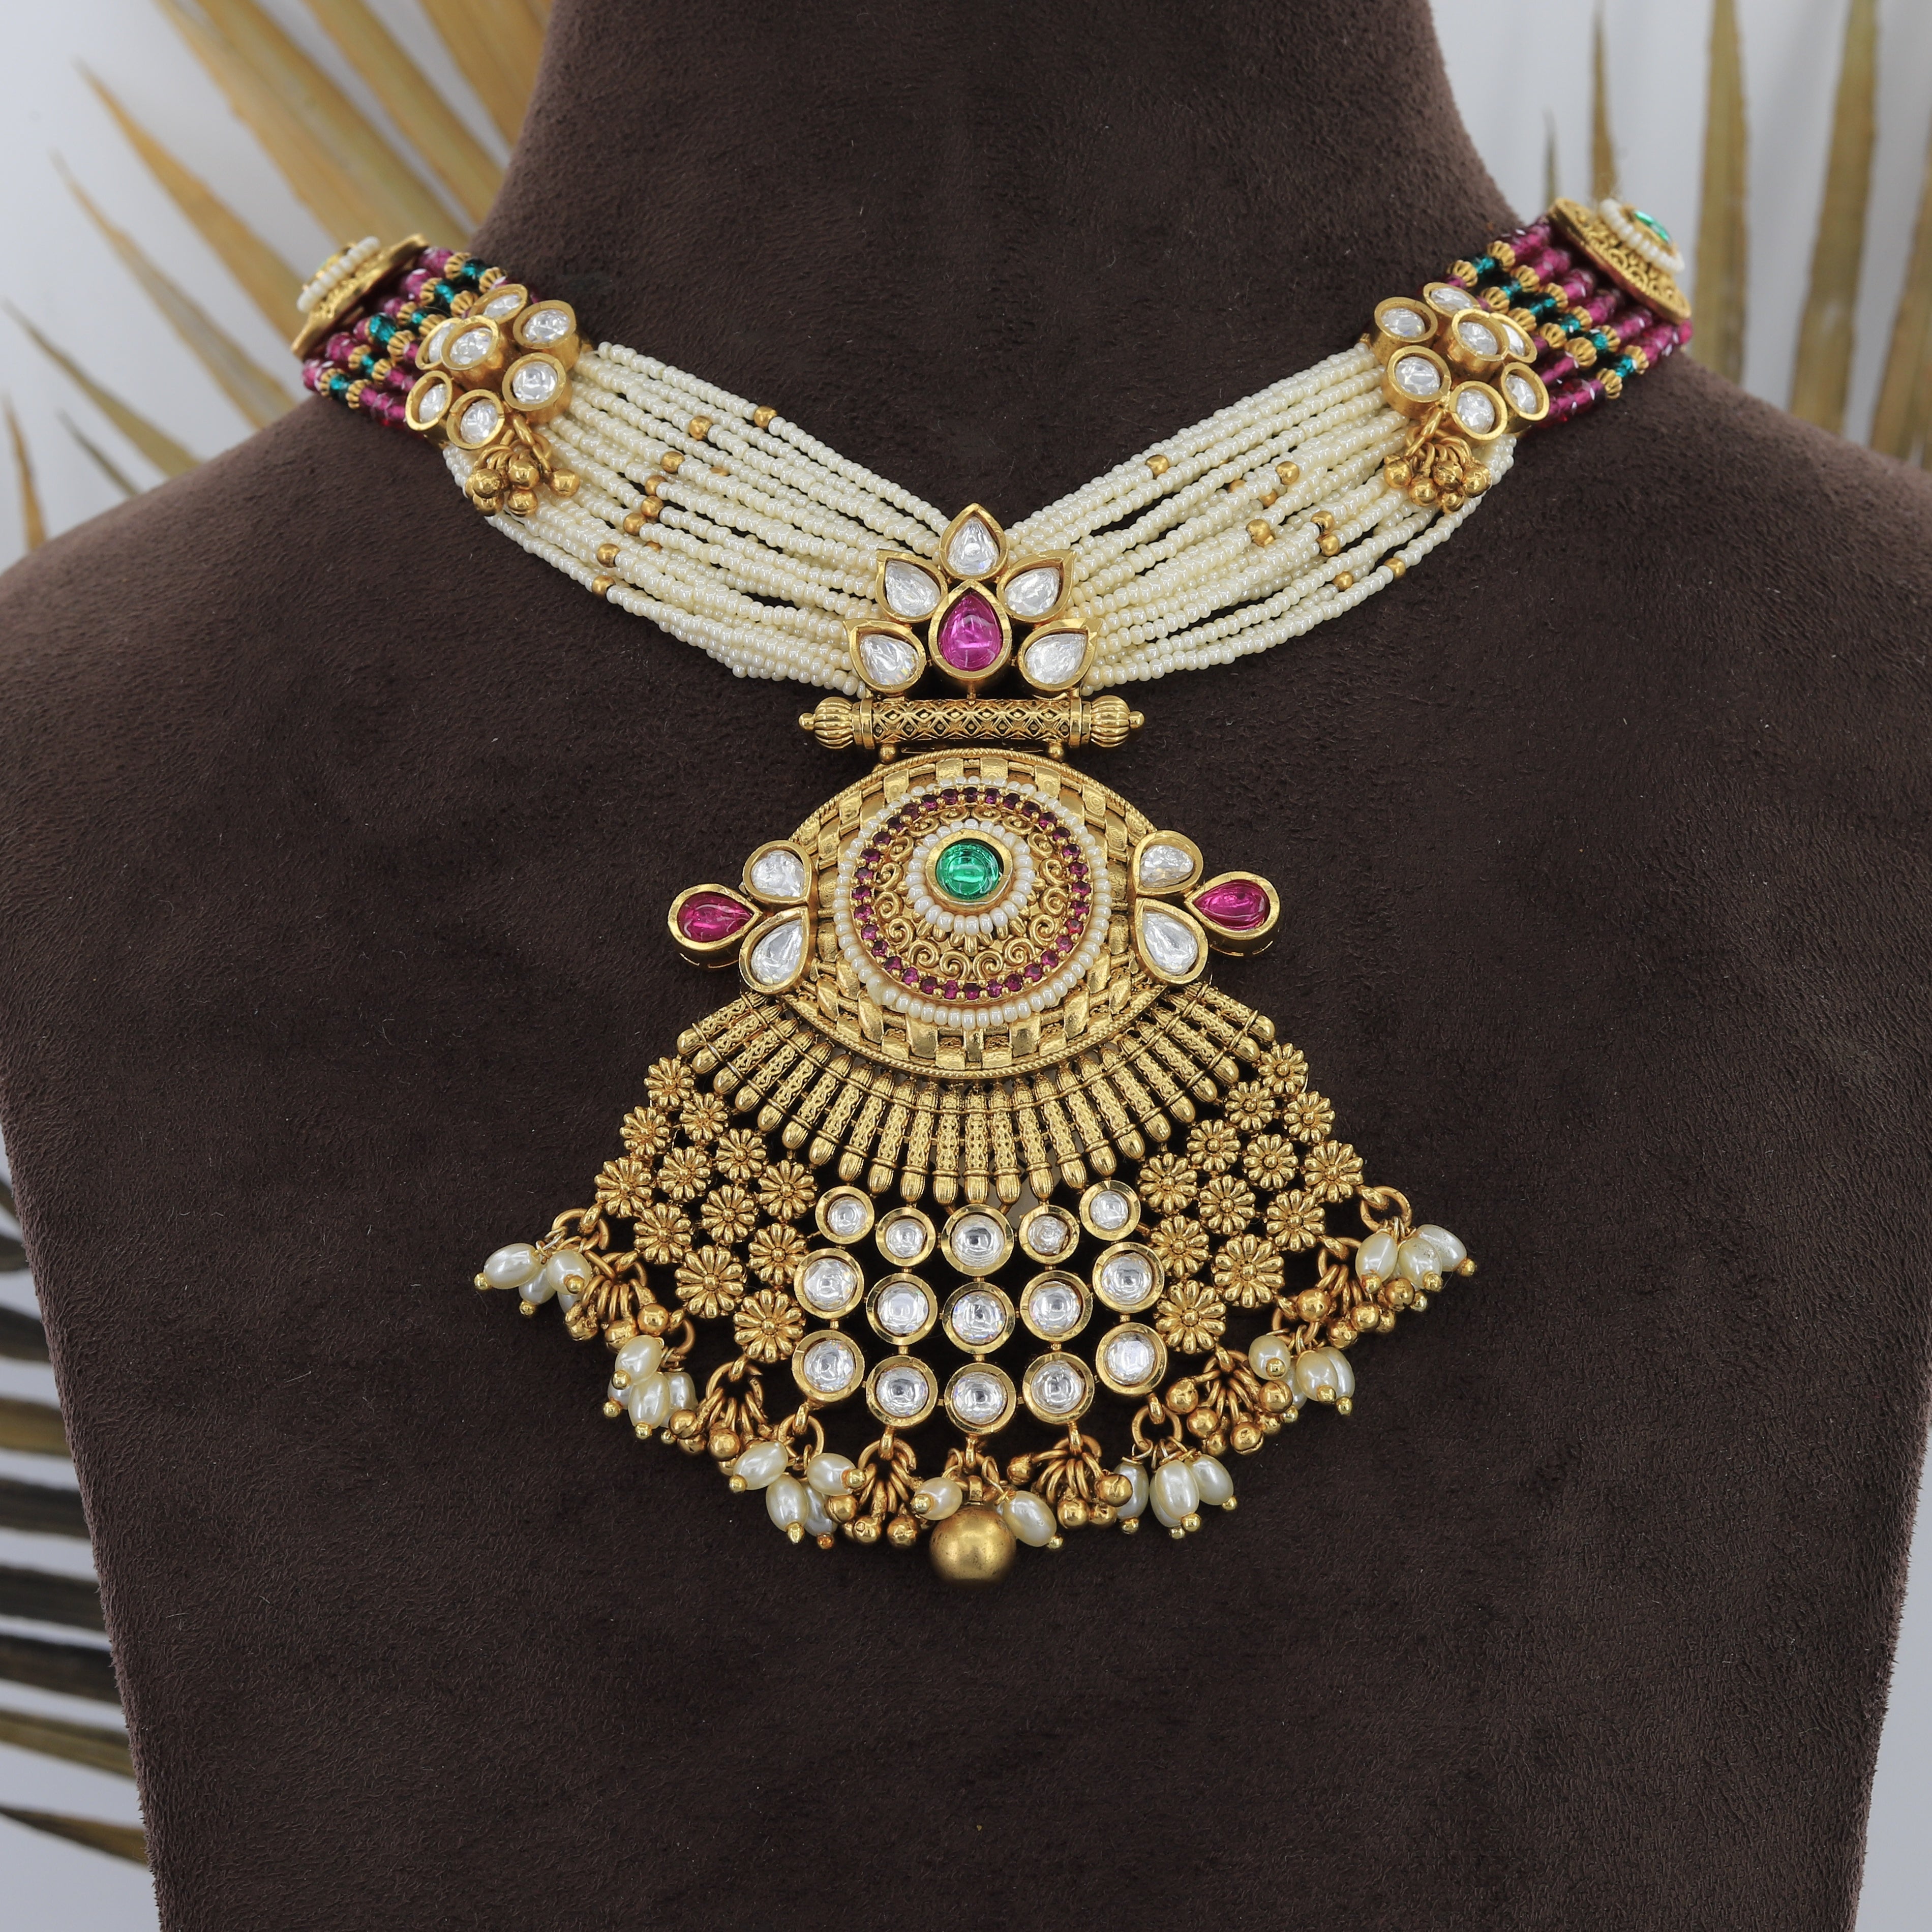 Bandhay Antique Moti Set Includes Earrings